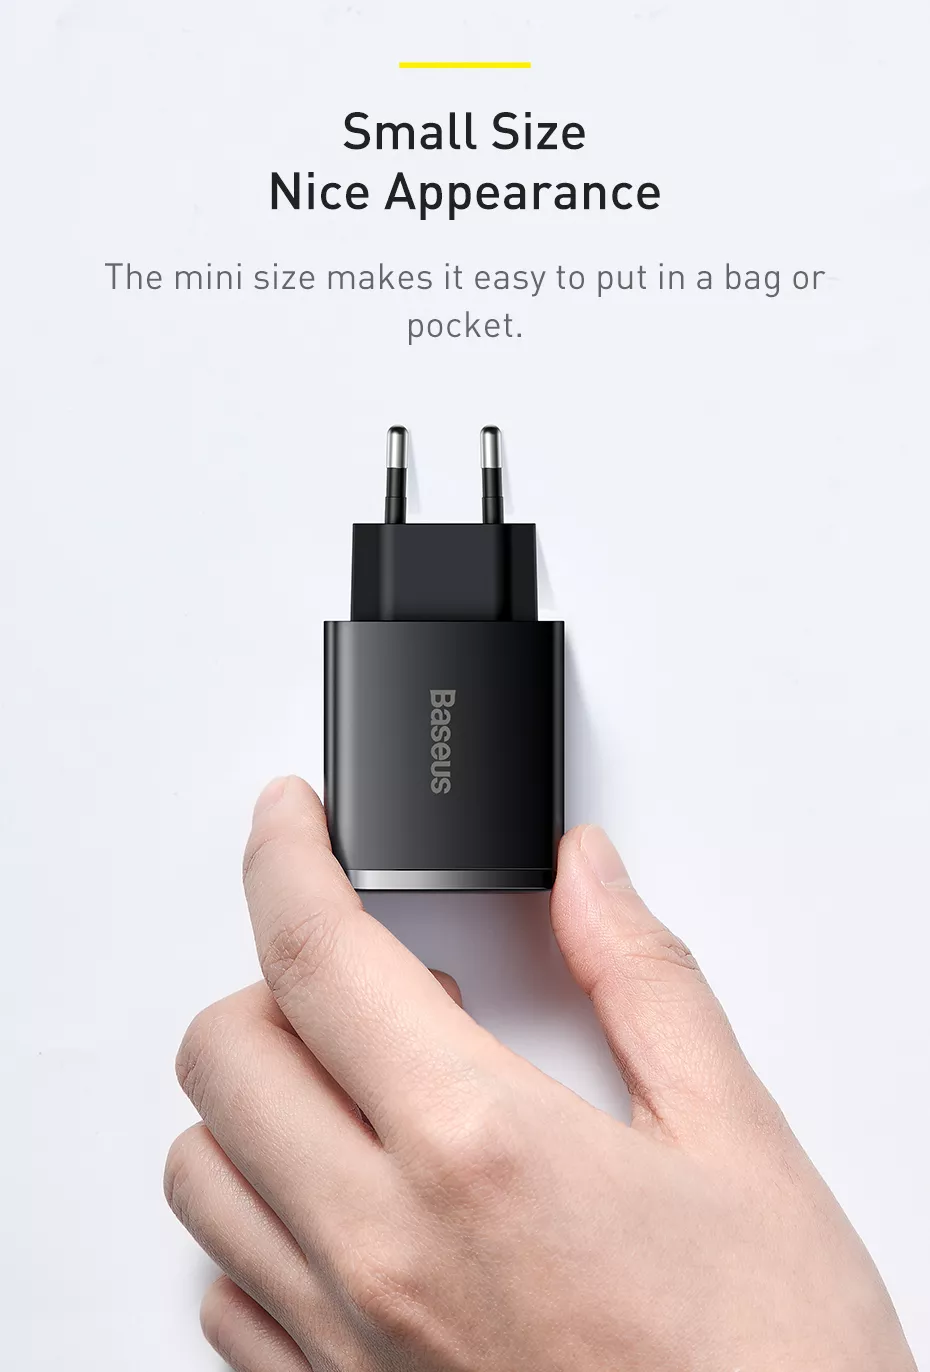 Cu Sac Nhanh Sieu Nho Gon Baseus Compact Quick Charger 30wusb Dual Port Type C30w Pd Qc3 0 Multi Quick Charge Support (21)